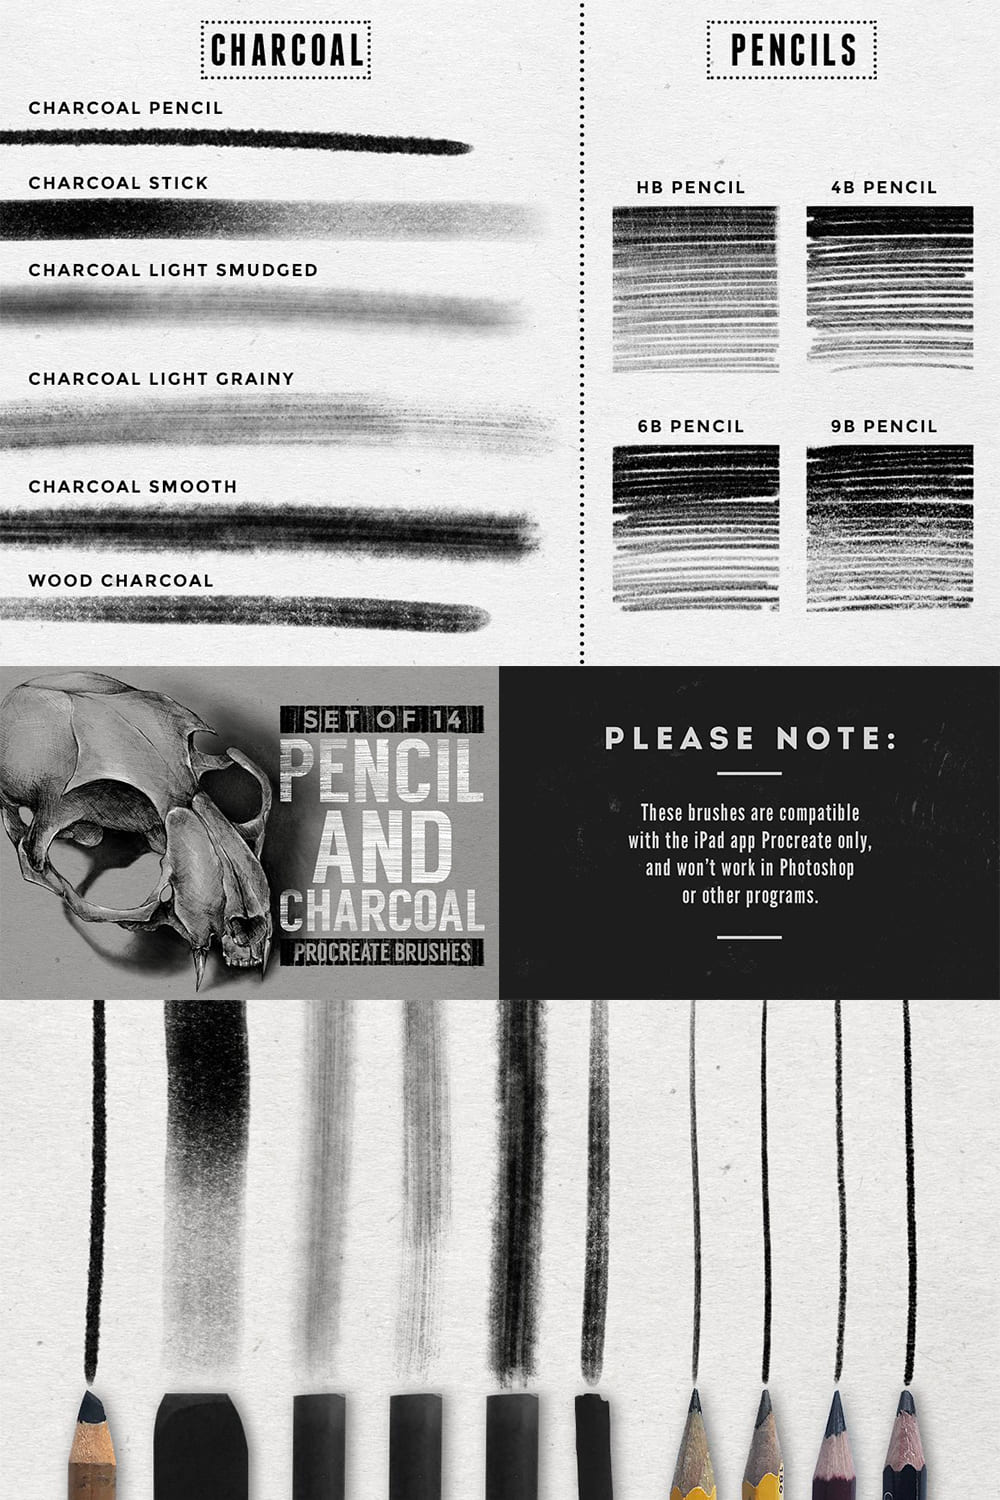 Pencil & charcoal Procreate brushes - for Pinterest.